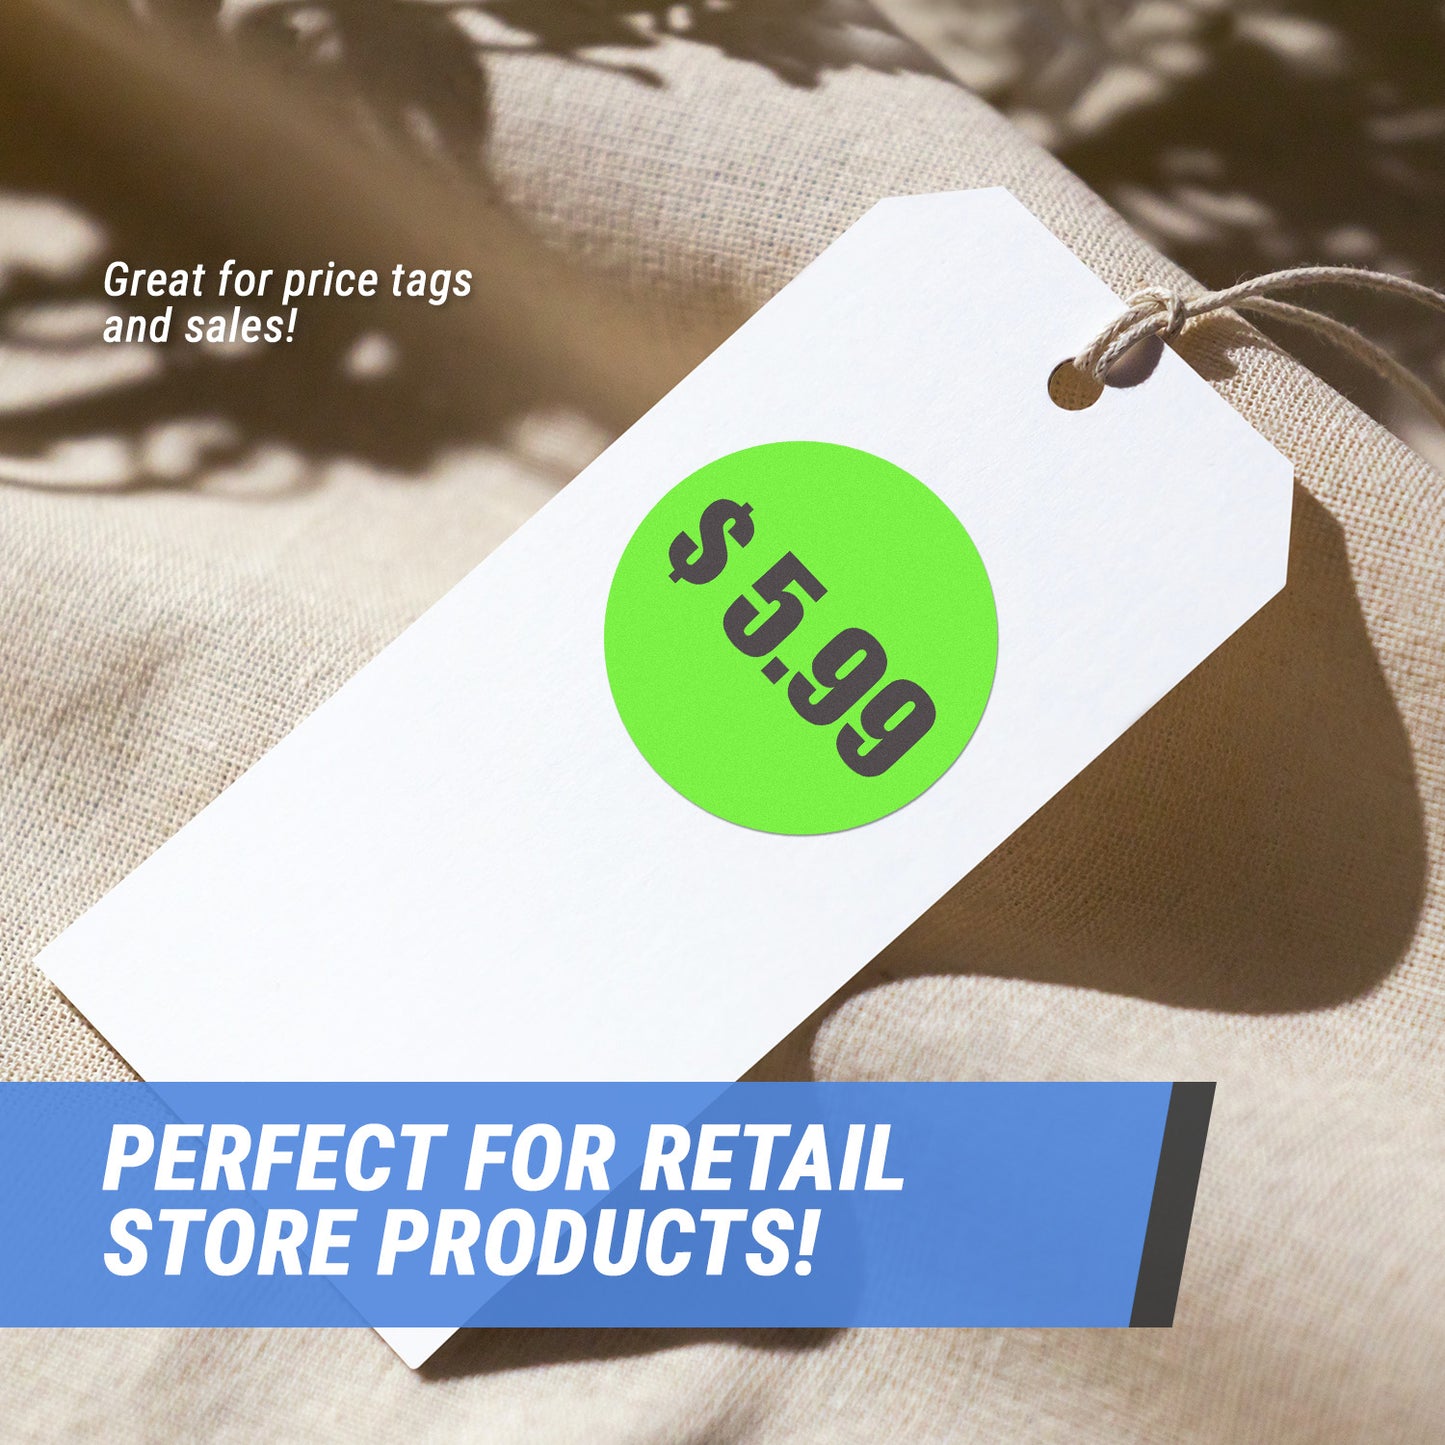 1.5 inch | Retail & Sale: $5.99 Five Dollars and 99 Cents Pricing Stickers